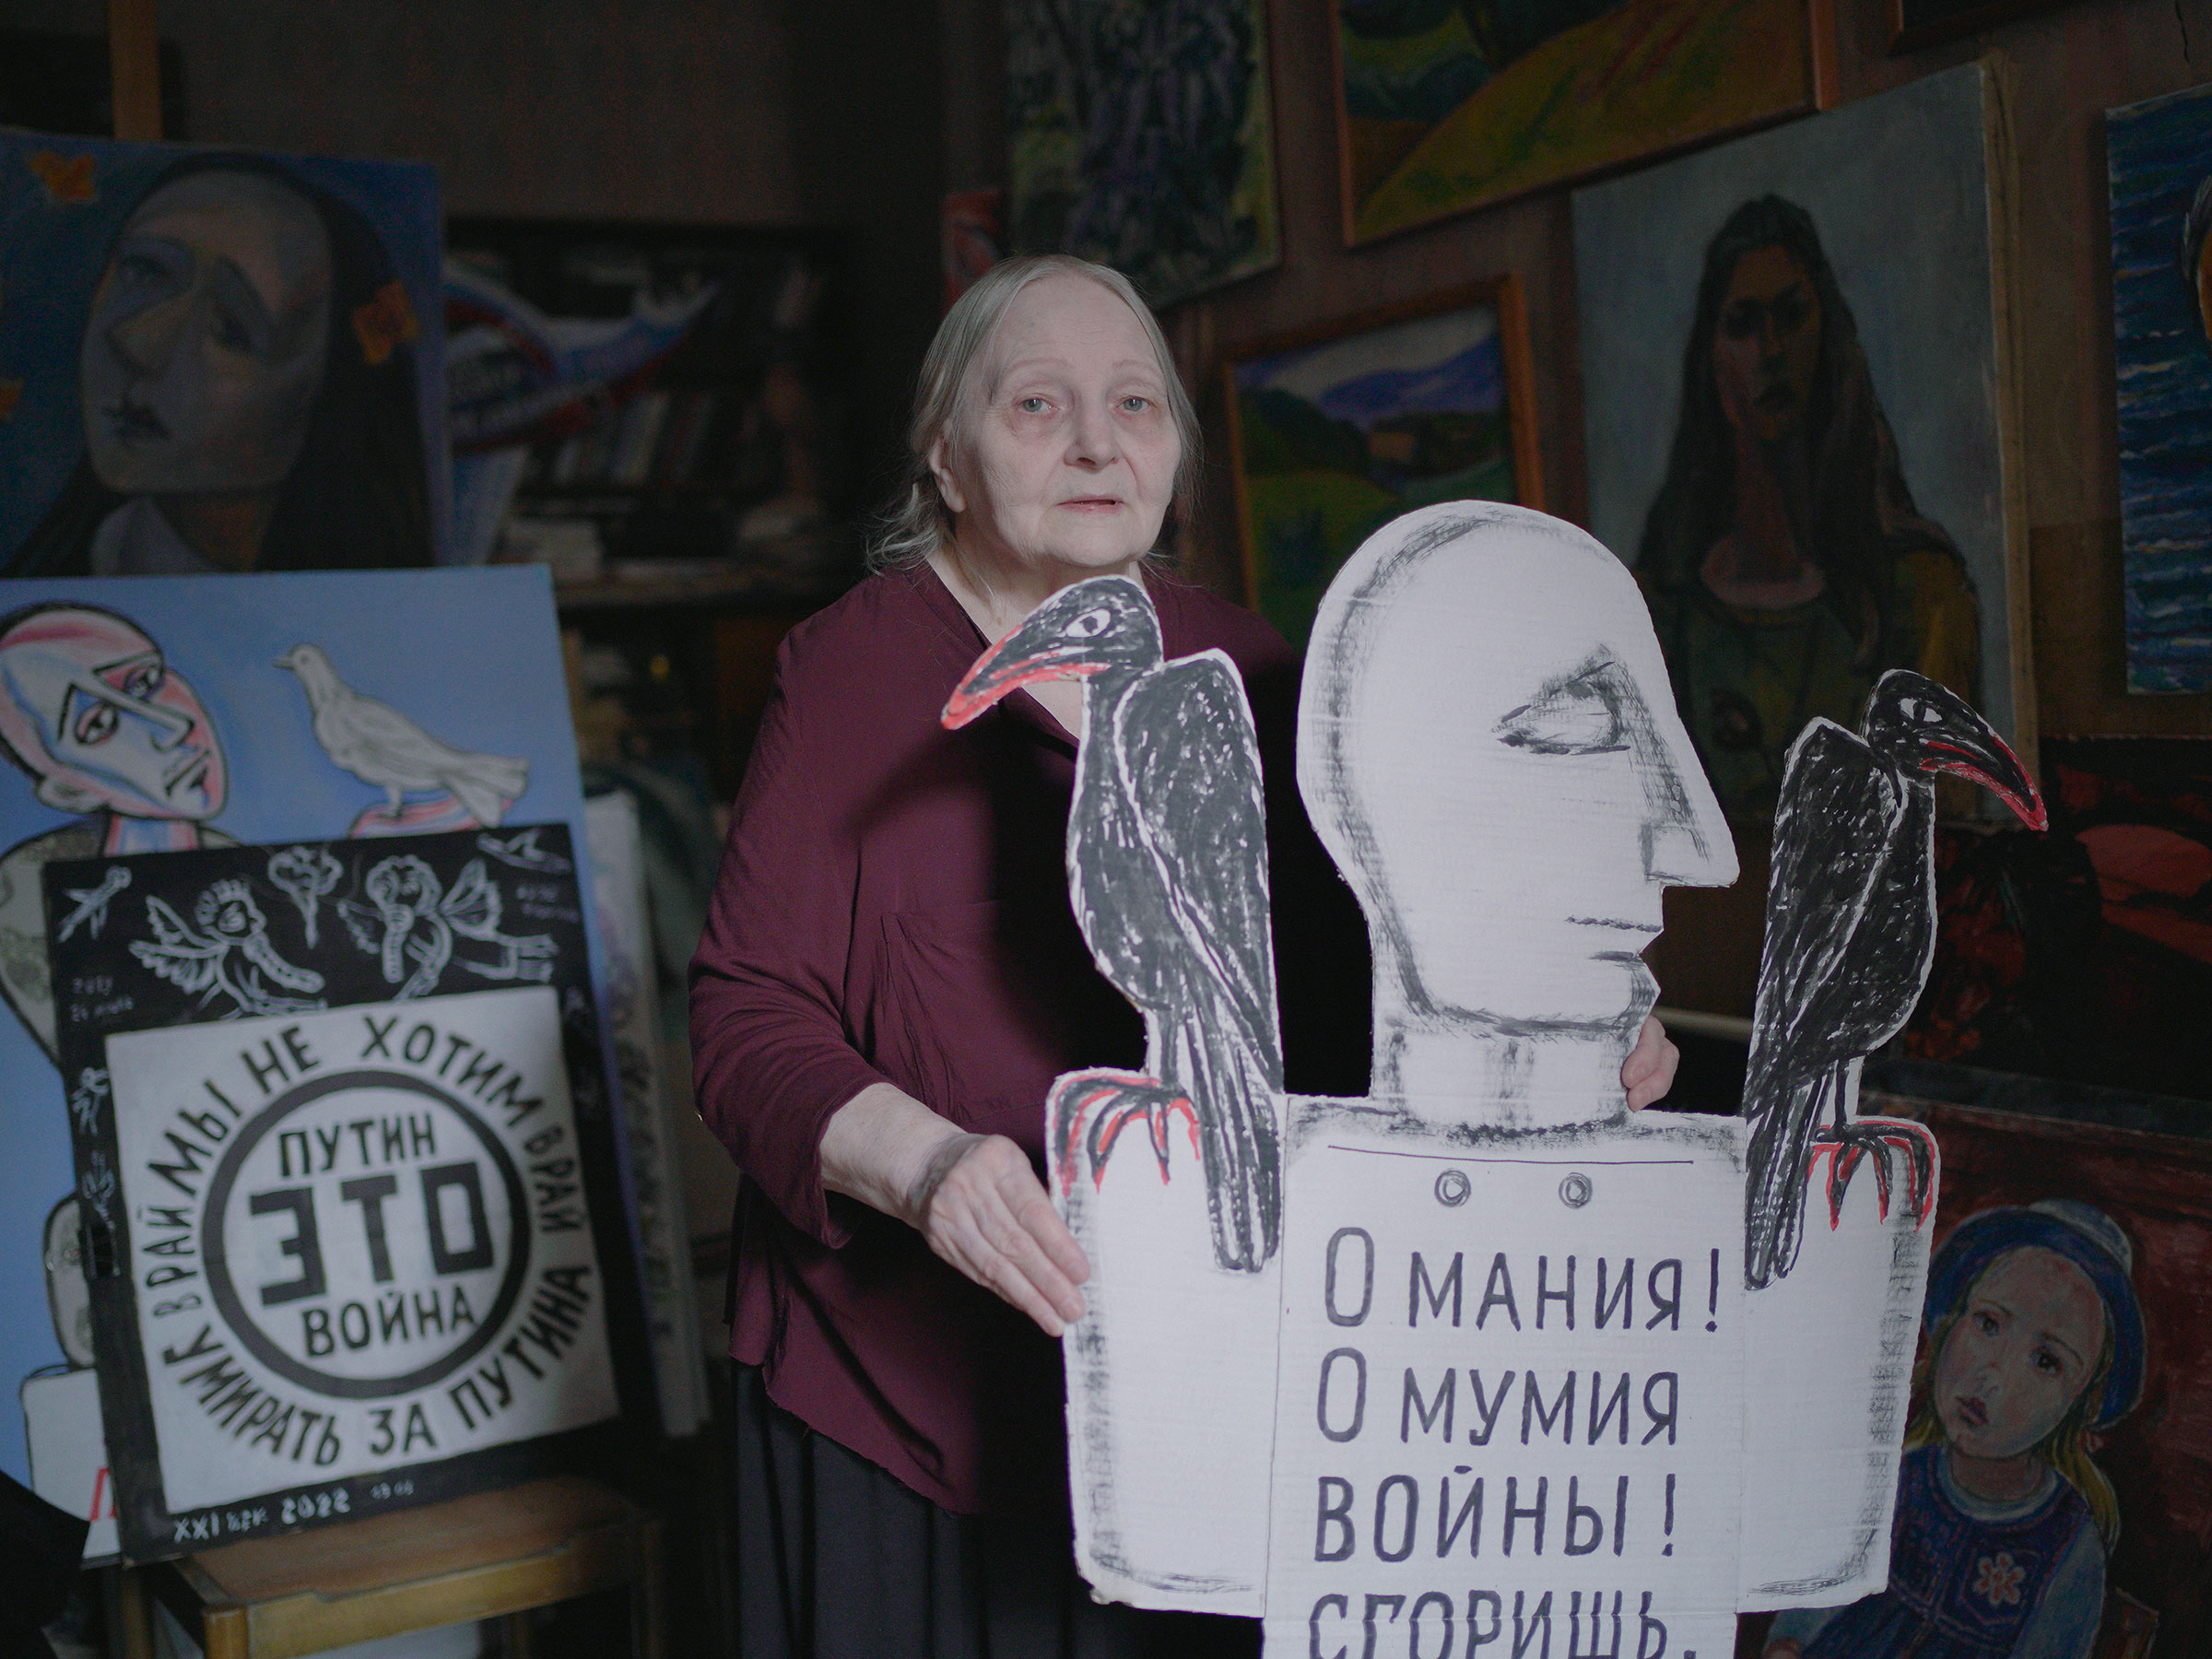 Portrait of Yelena at her home in Saint Petersburg, Russia, 28 March 2022Elena Osipova, visual artist, 77 . She has been protesting on the streets of St. Petersburg with her political posters for 20 years. Many people call her the "conscience of St. Petersburg". «I am a post-war child and my family survived the Siege of Leningrad. I have been going out to protest since 2002, after terrorist attack on Dubrovka in Moscow during the musical «Nord-Ost». I went out for the first time with a one-man picket to the Mariinsky Palace in St. Petersburg. People just looked at me, but no one came around. After that I decided to paint posters as an artist and share my views this way. Next four years I went out with political posters. People passing by didn't want to look and read that. But that's never stopped me. After a while I was standing with another active group of people. I felt changes because youths’ growing interest in politics. I saw many people who demanding changes and working on that. I saw many protests in Russia, the government has not really done anything for our country development in 20 years. And now they have started the war. 24 of February I got a night call from a Moscow journalist who asked me to comment on this situation. I said: «Russian fuhrer comes to Anschluss». I have been on protests since 2014 and painted posters against war, but I didn't expect it to happen on such a scale. I was arrested by police many times. They demanded me disappear and stay aside I'm afraid of aggressive so called titushki* more than police now. They pursue me from my home and get aggressive when I showed my posters on the street. I was ashamed of their actions. I'm hoping for a change of power. Bulat Okudzhava, a Soviet poet, died without hope for humanity. I still hope and go out with posters against this "special military operation" as long as my health allows. I am glad to see a lot of modern people who protests and speak out against this nightmare